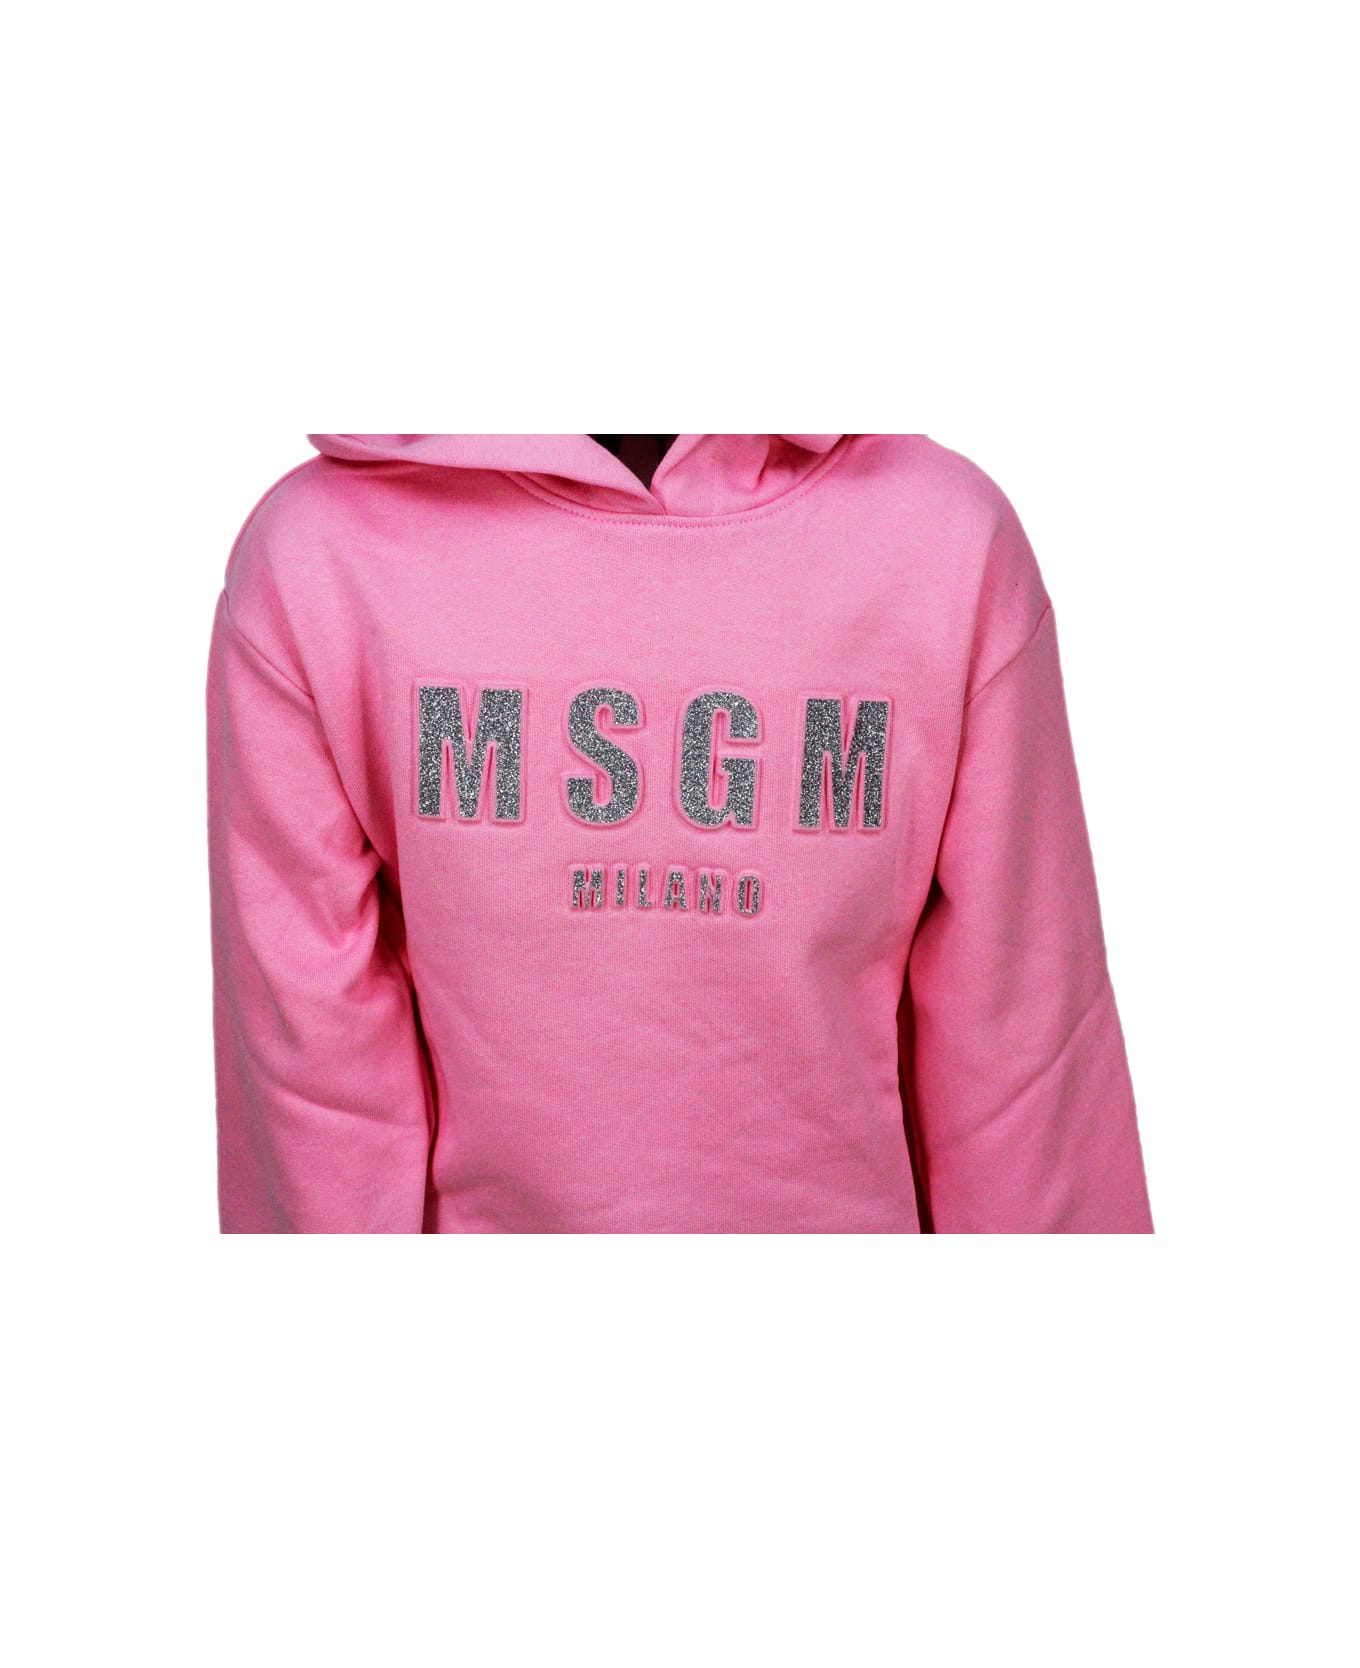 MSGM Long-sleeved Hooded Sweatshirt With Embossed Writing With Lurex - Pink ニットウェア＆スウェットシャツ